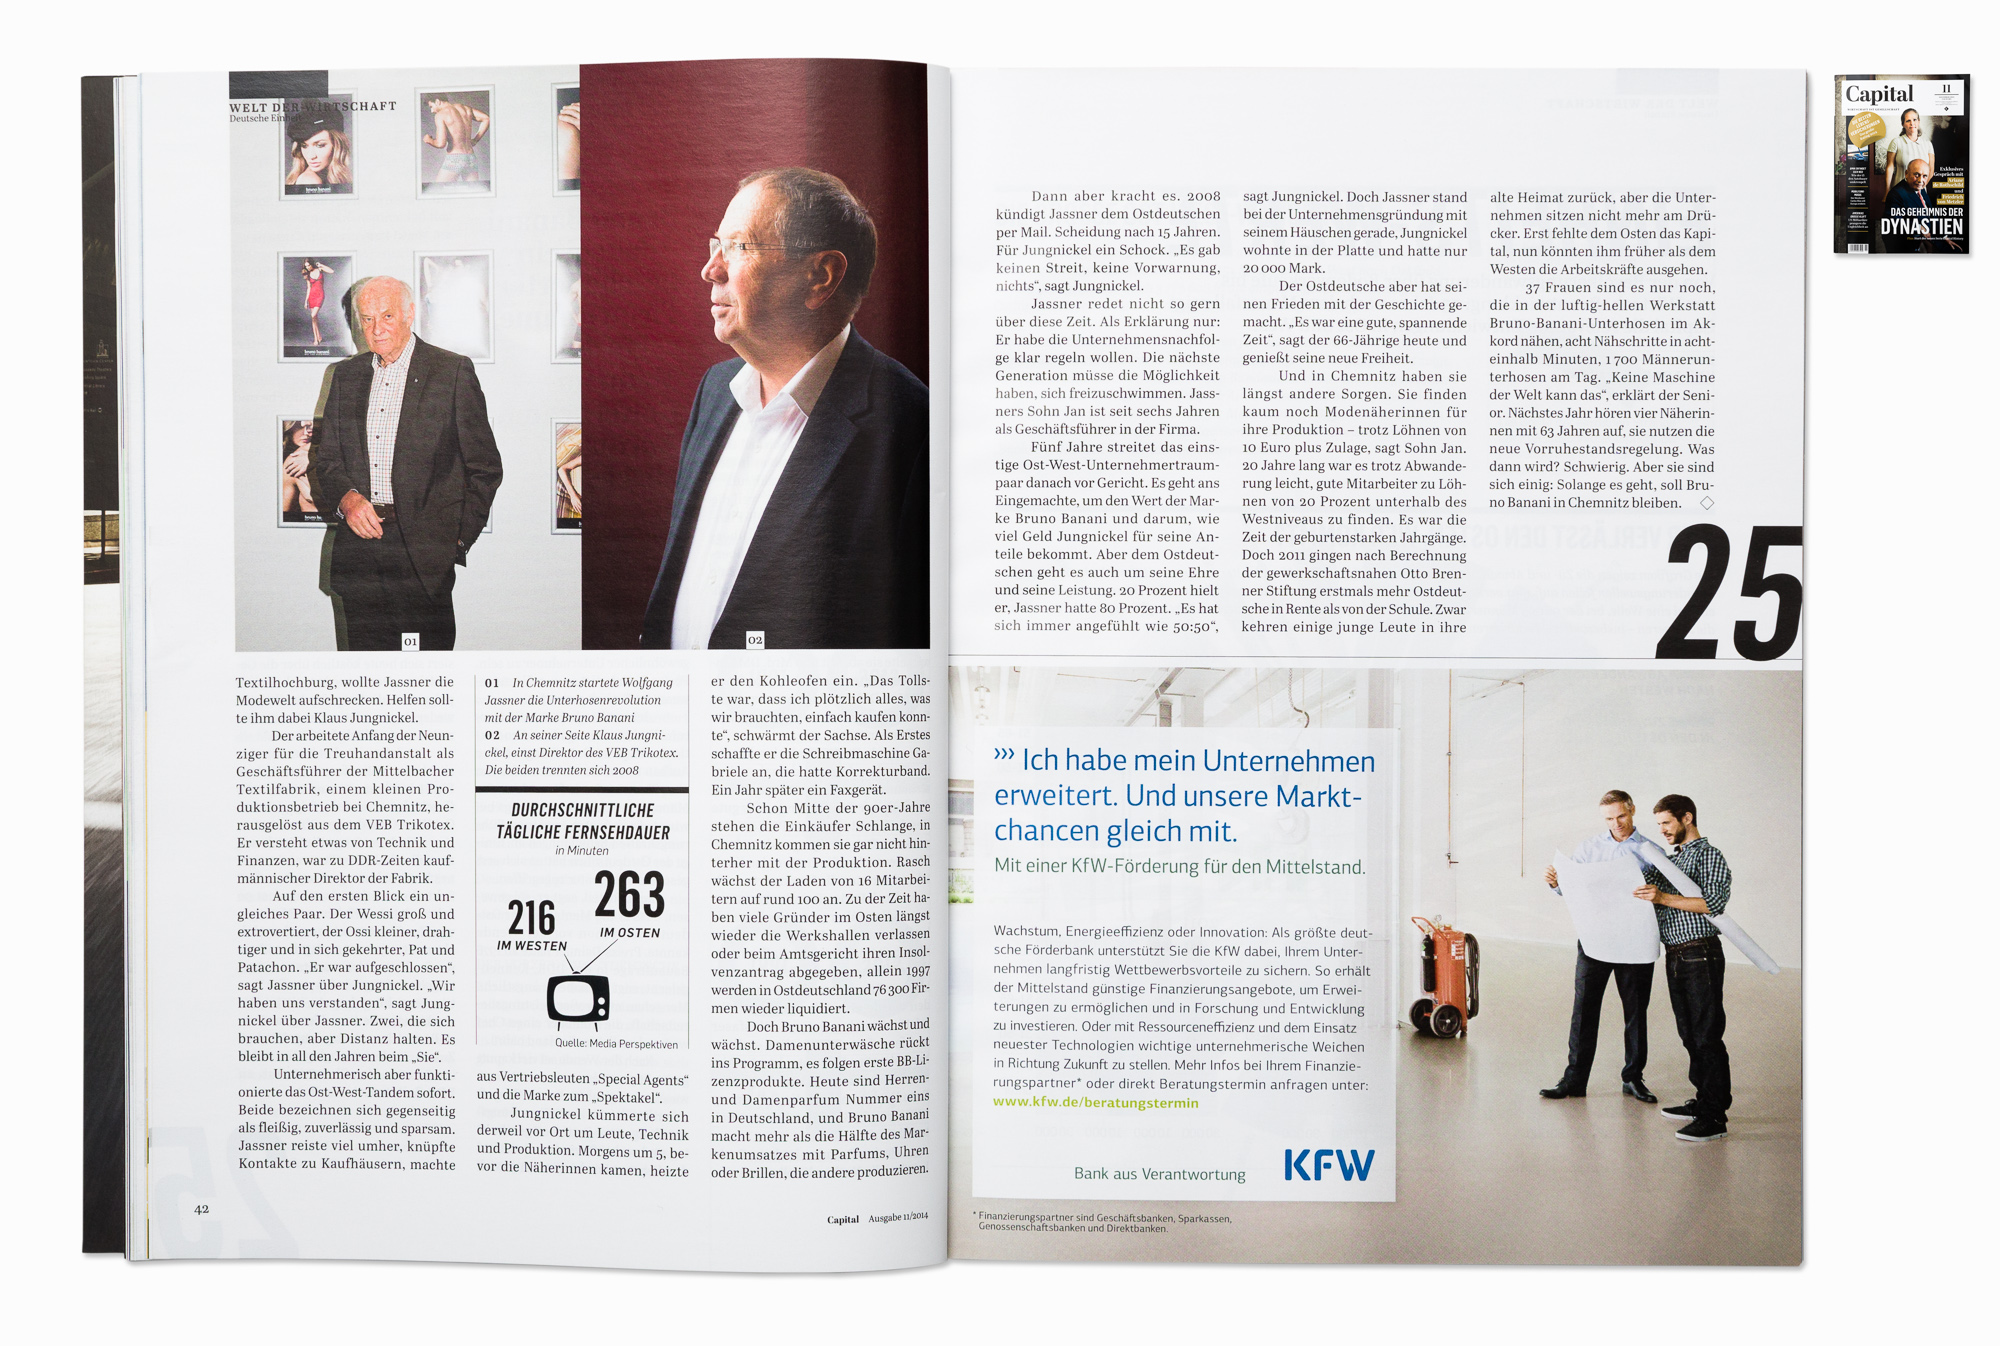   W. Jassner and Klaus Jungnickel,&nbsp; founders of Bruno Banani, for Capital magazine, Chemnitz 2014  